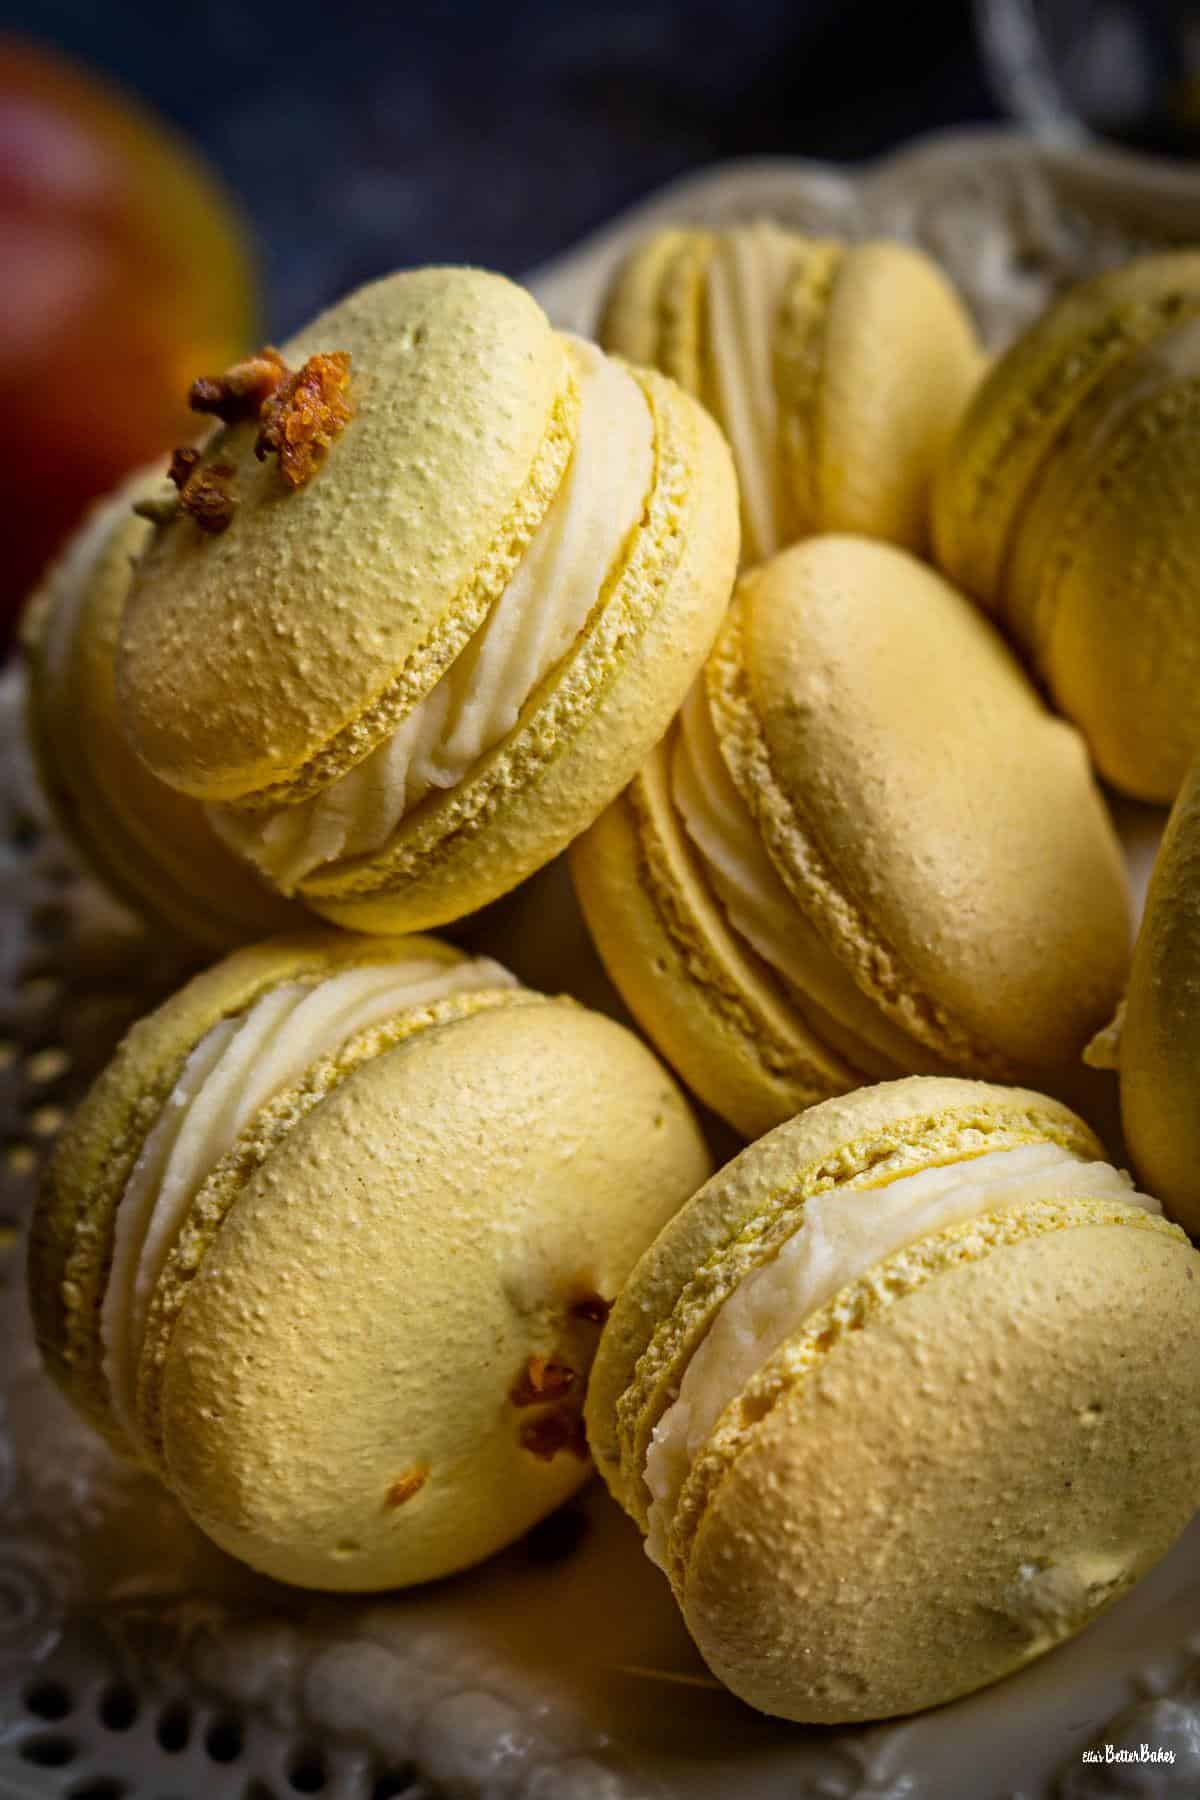 portrait style of macarons on plate - second picture